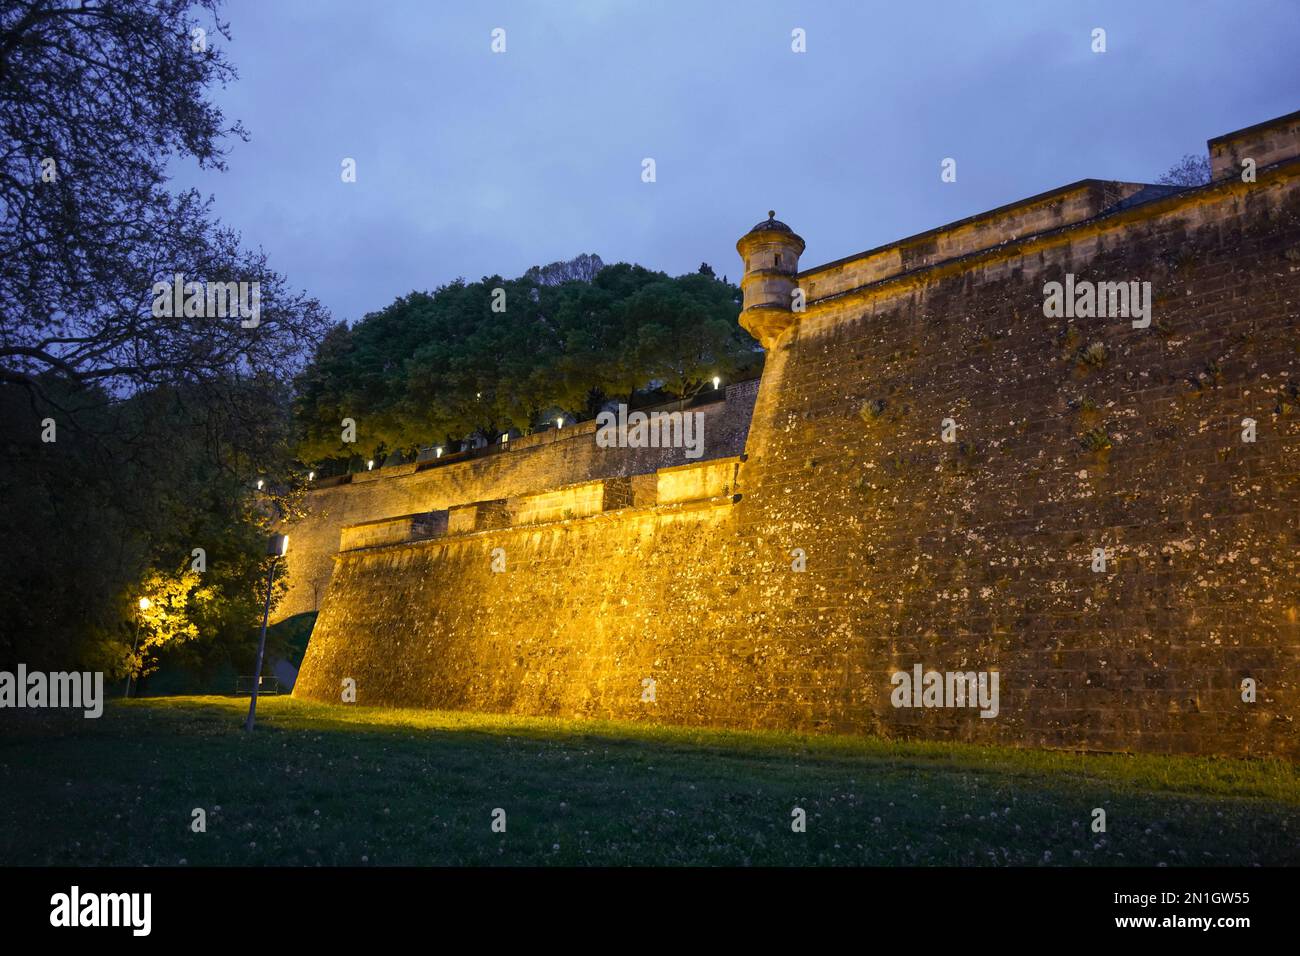 Old city walls and bulwarks of the grand fortified citadel, the star-shaped Ciudadela, Citadel of Pamplona, Pamplona, Navarre, Spain. Stock Photo